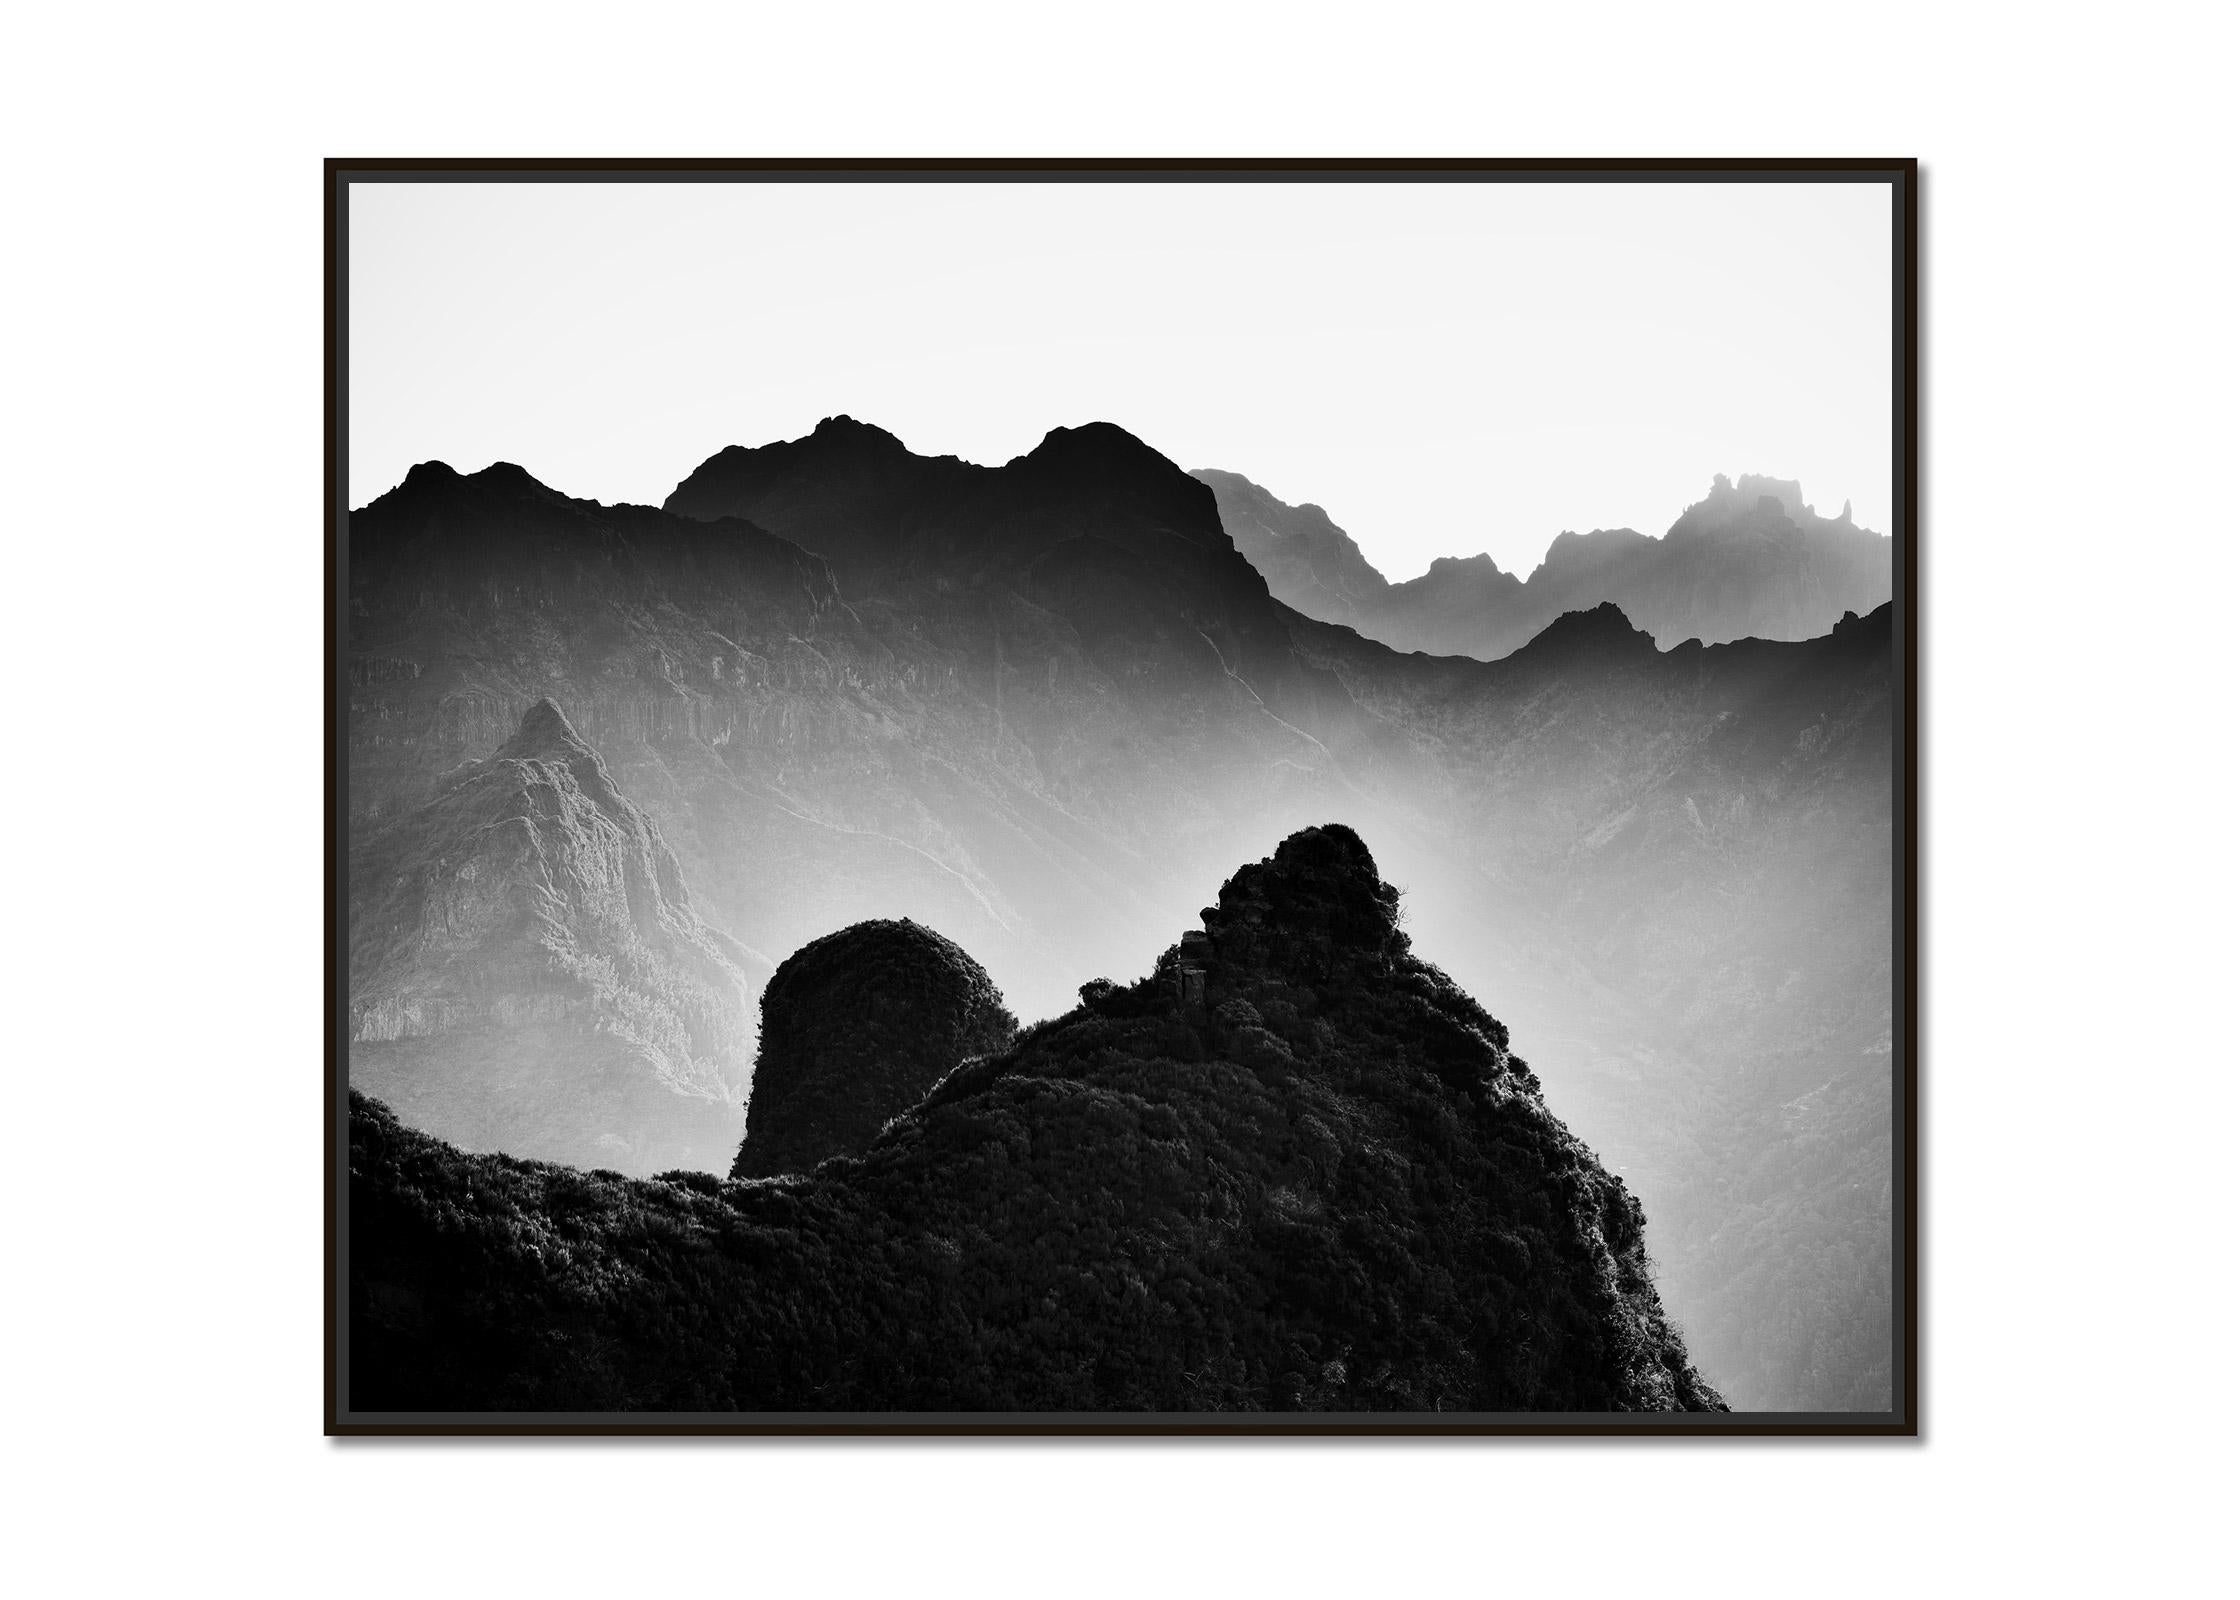 Madeira Peaks, Sunrise, Shadow Mountains, black and white photography, landscape - Photograph by Gerald Berghammer